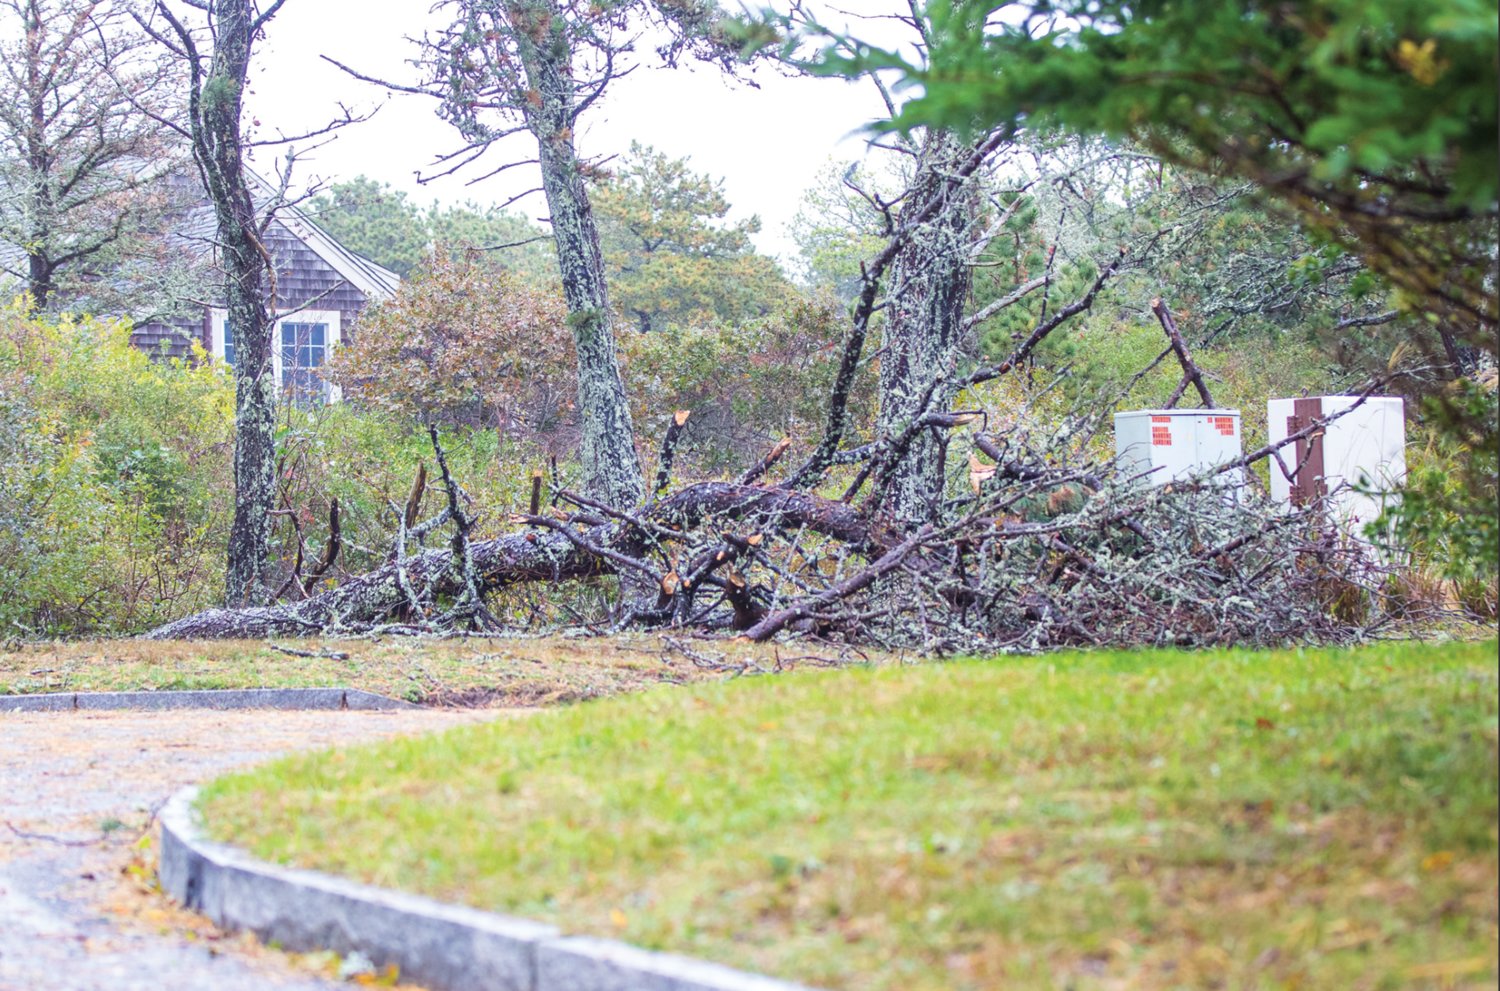 Downed trees uprooted by Wednesday's nor'easter.